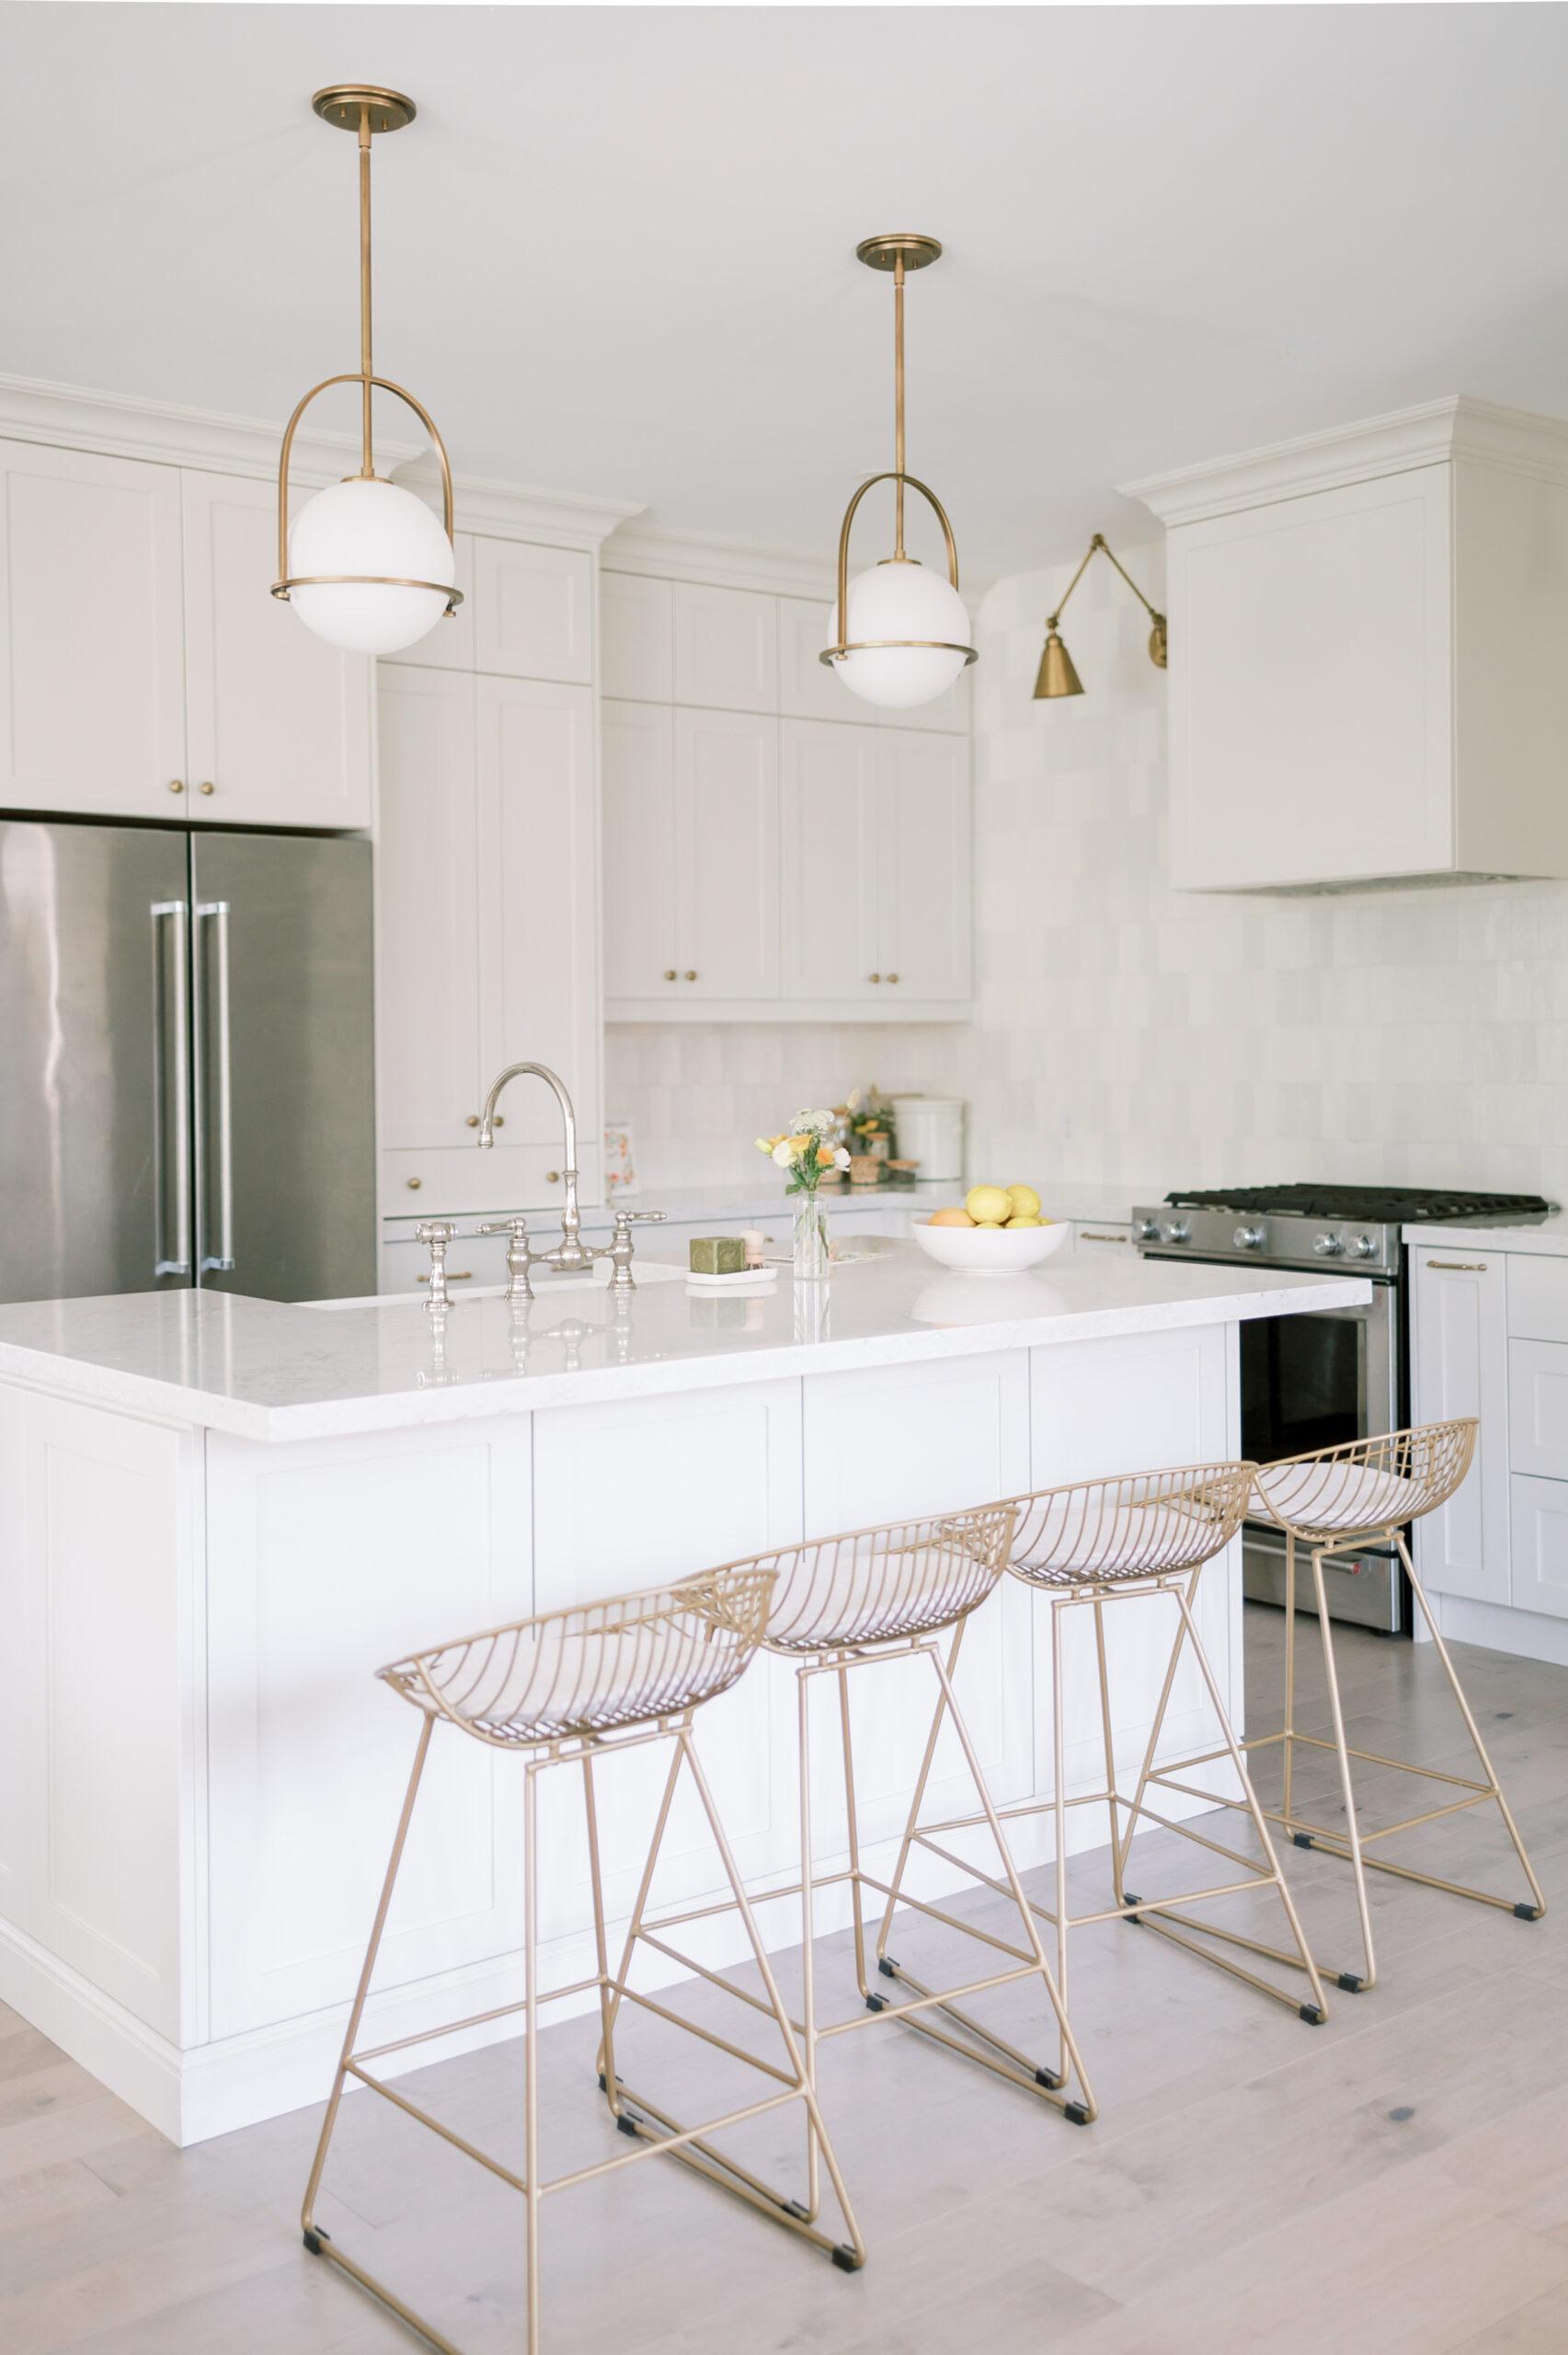 A bright, modern kitchen with white cabinetry, marble countertops, and gold accented bar stools at the island. pendant lights hang above, and a bouquet of flowers adds a touch of color.